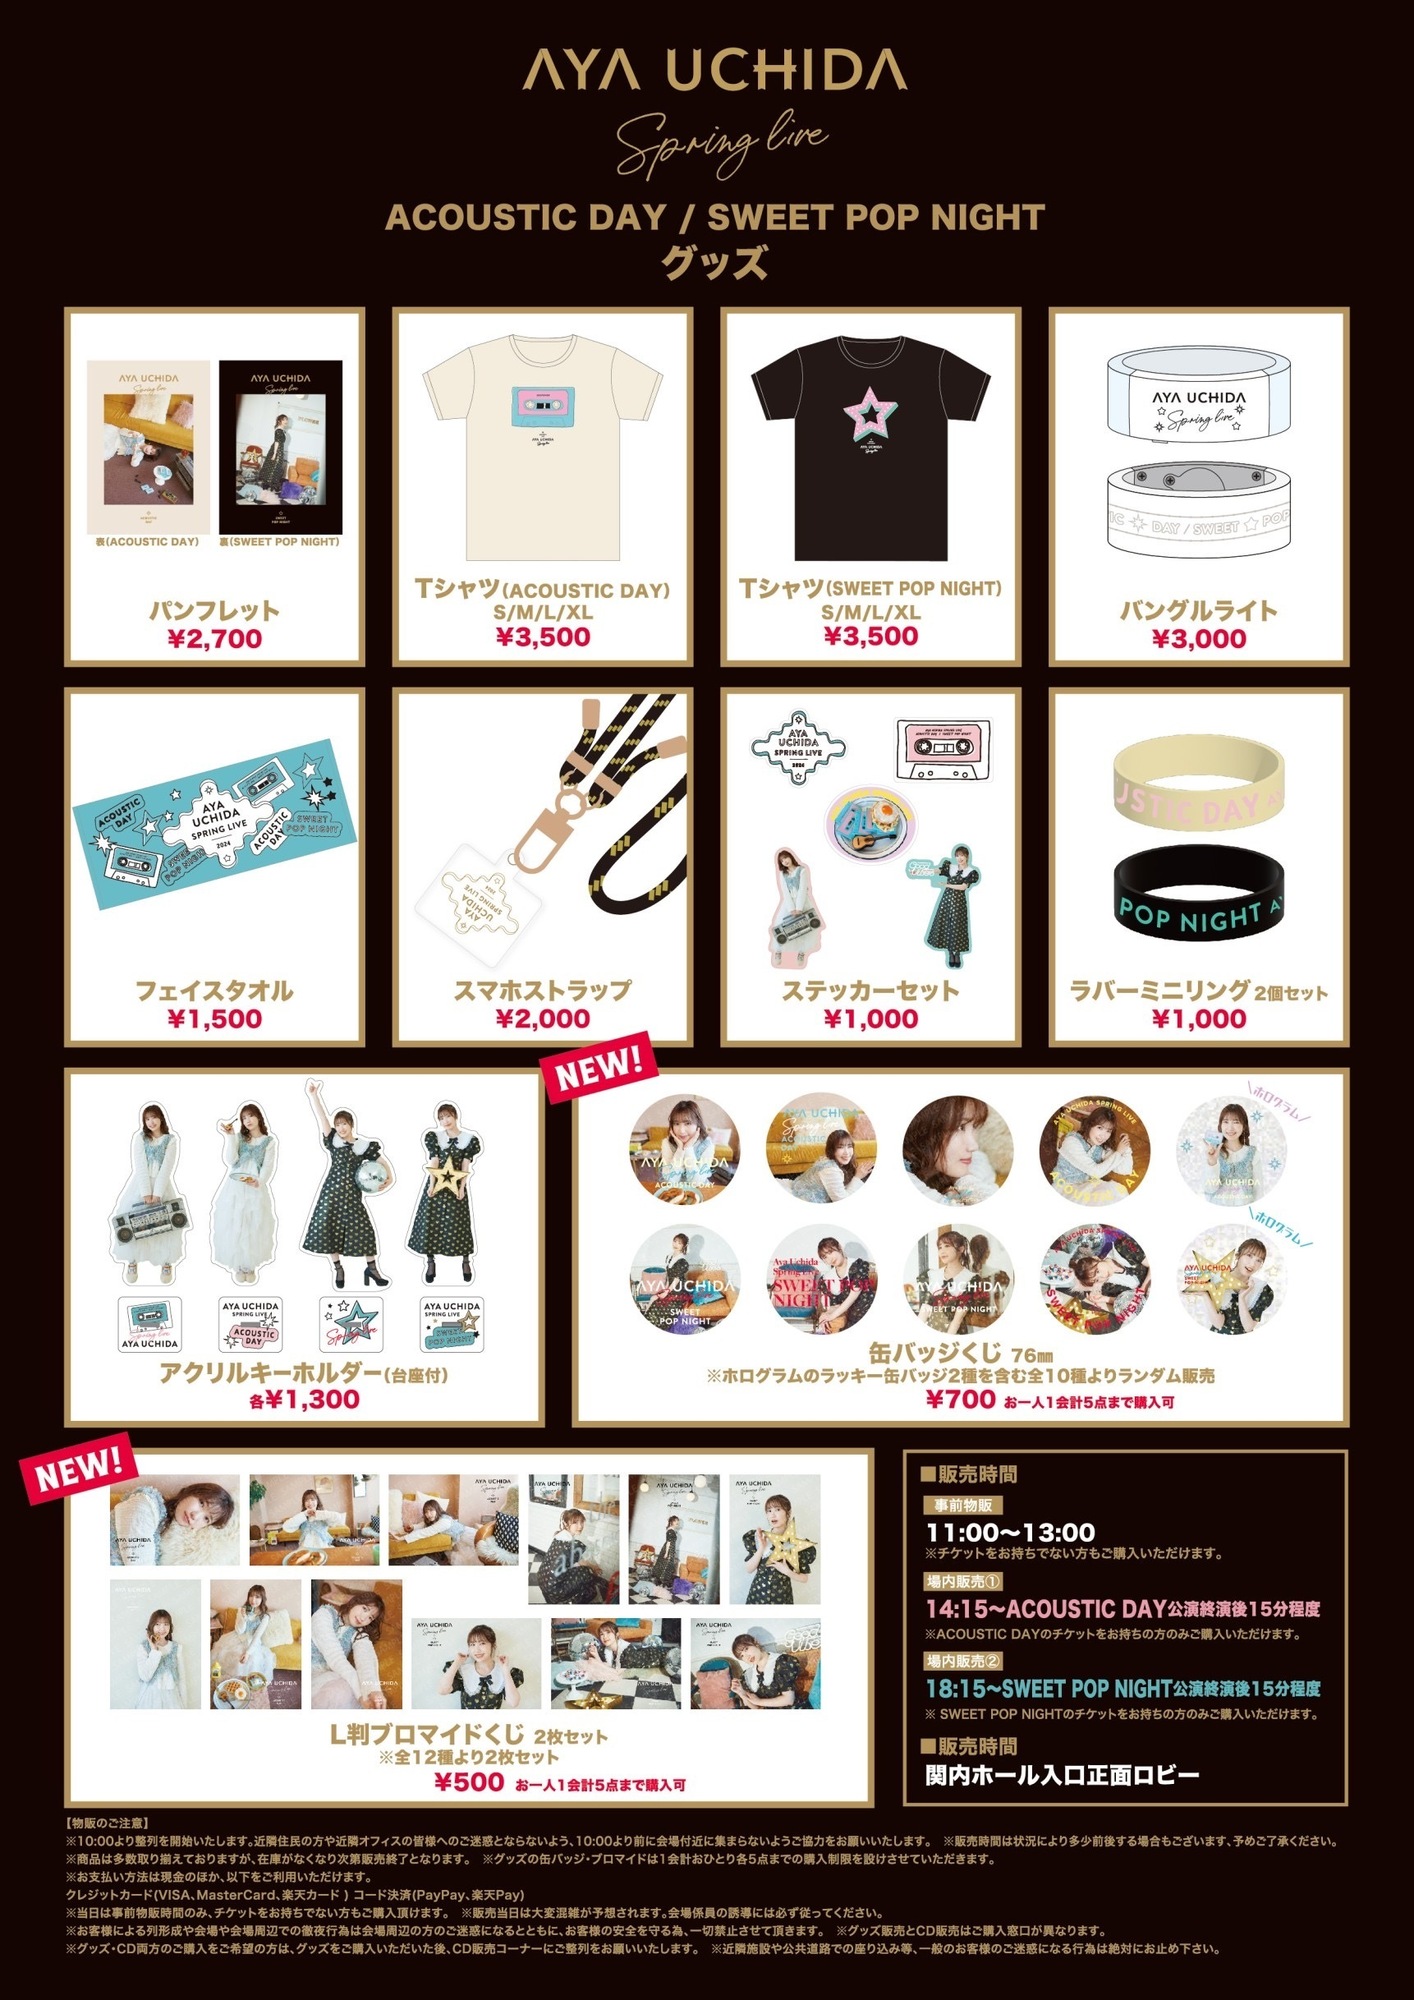 AYA UCHIDA SPRING LIVE ACOUSTIC DAY / SWEET POP NIGHT グッズ・CD会場販売情報 | 内田彩  OFFICIAL WEBSITE